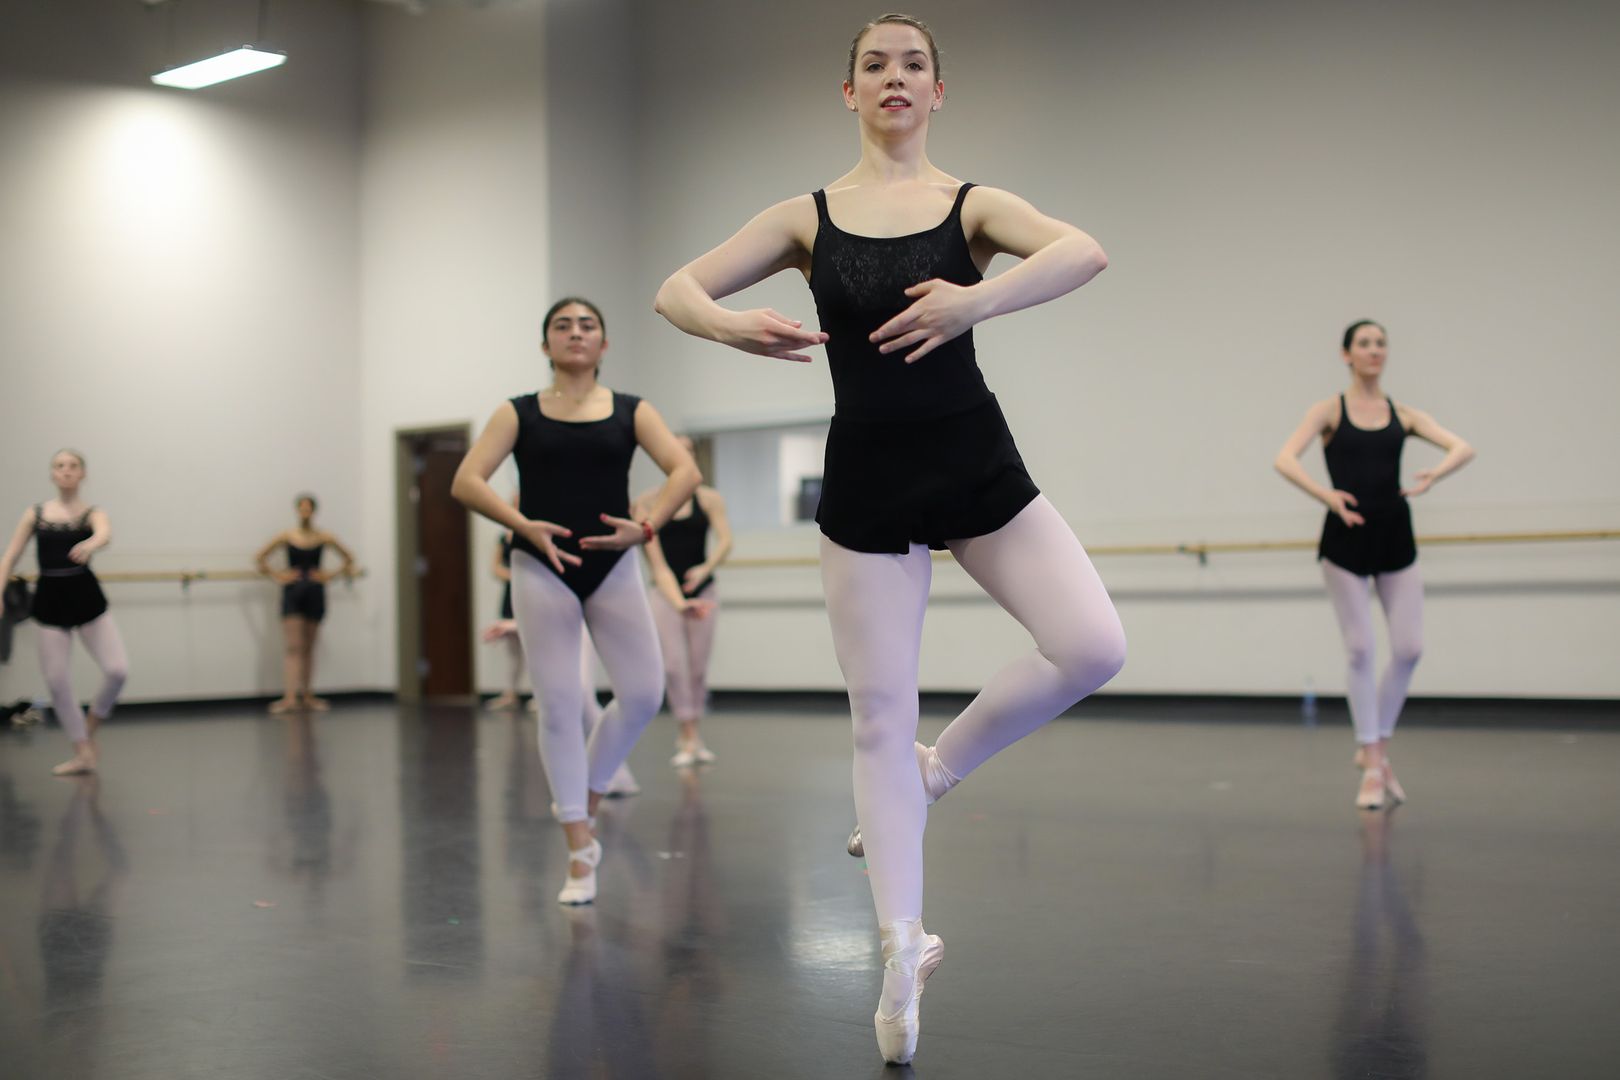  / Ballet students practicing in a large dance studio at Chastain Pointe